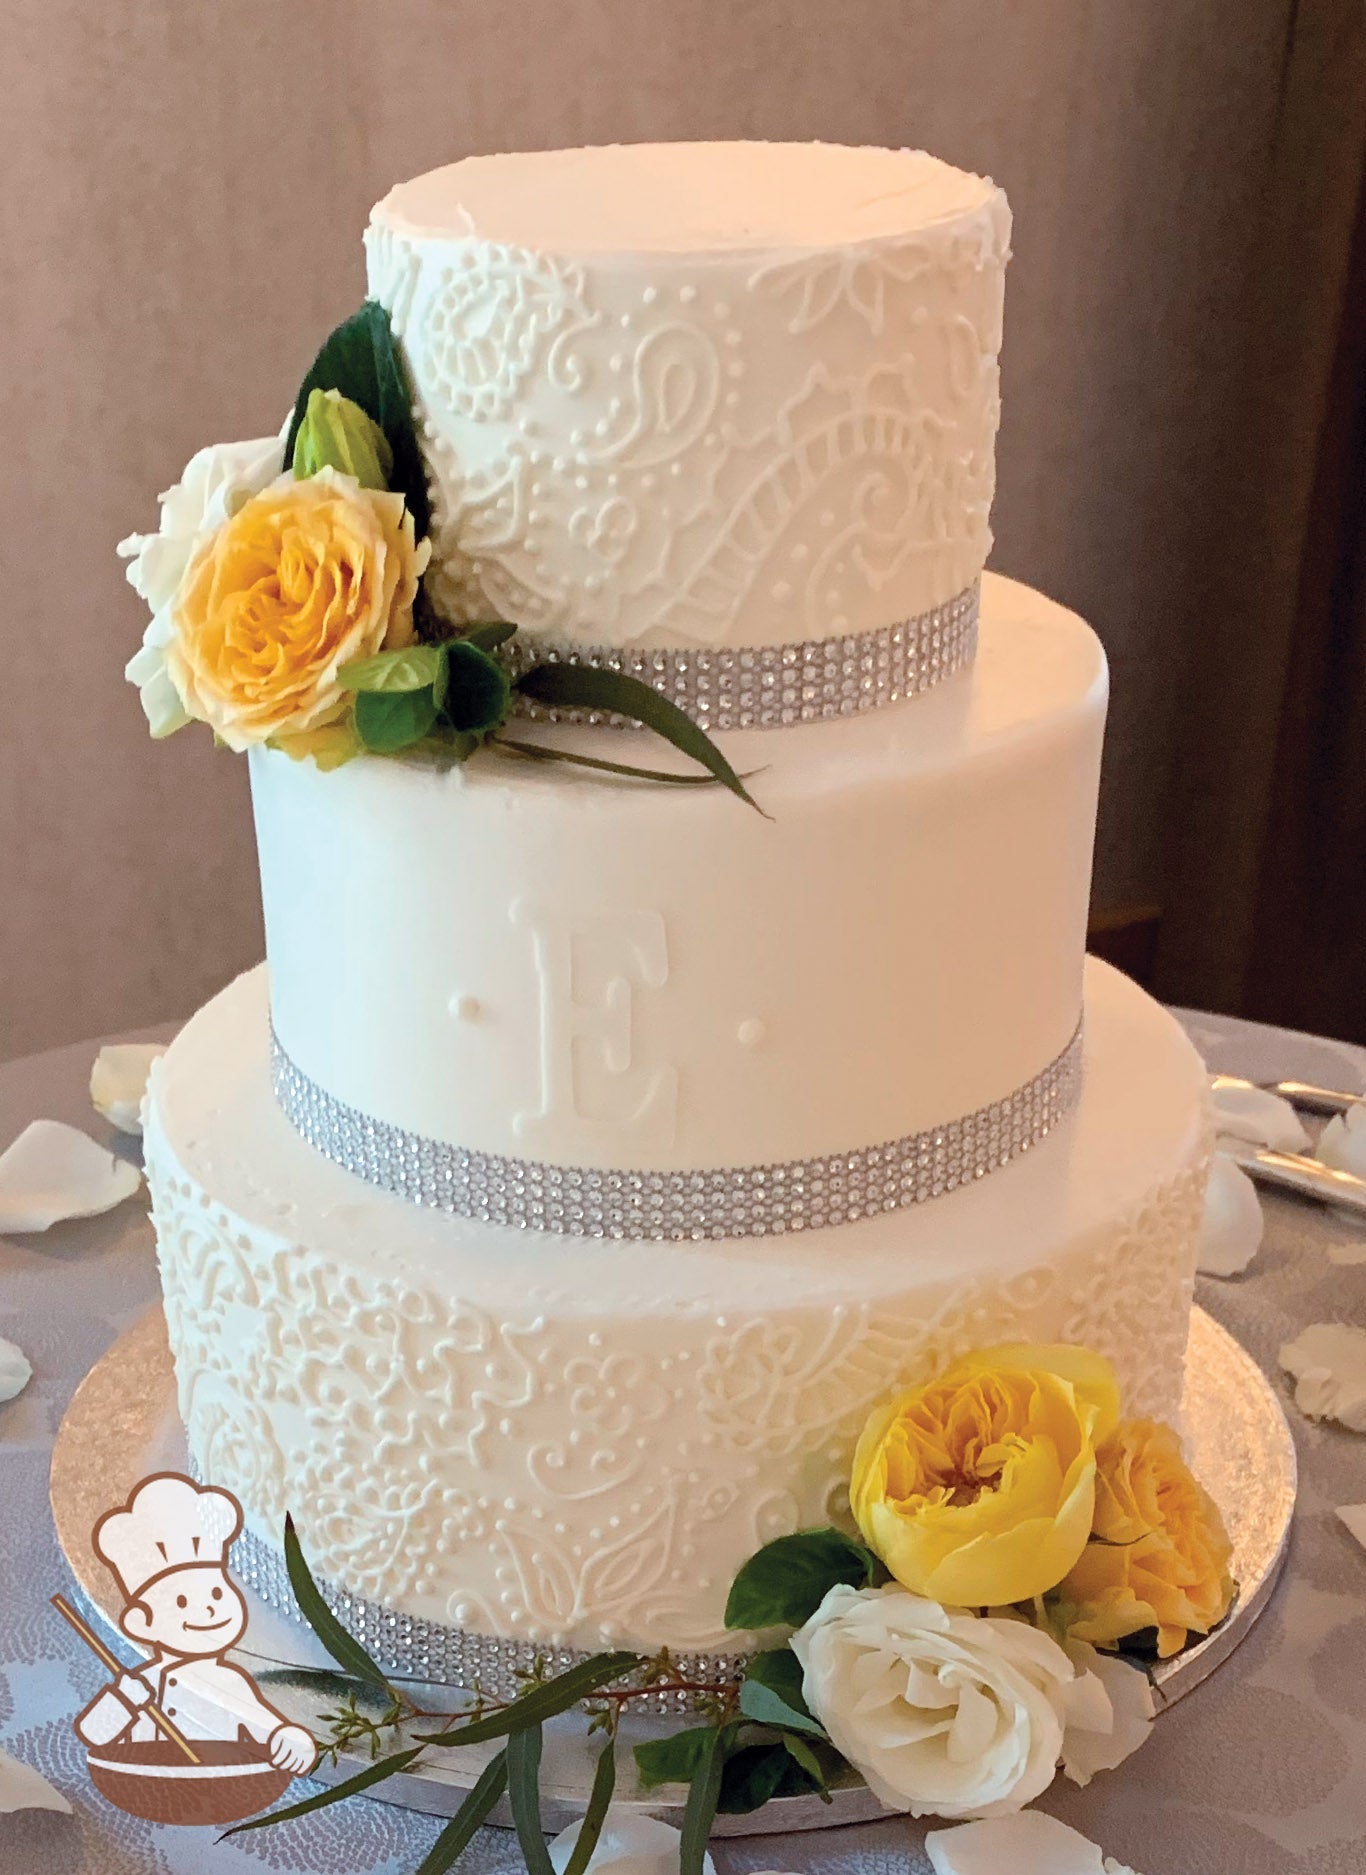 3-tier cake with smooth white icing and decorated with buttercream piped flowers and scrolls on bottom and top tier and a fondant monogram.